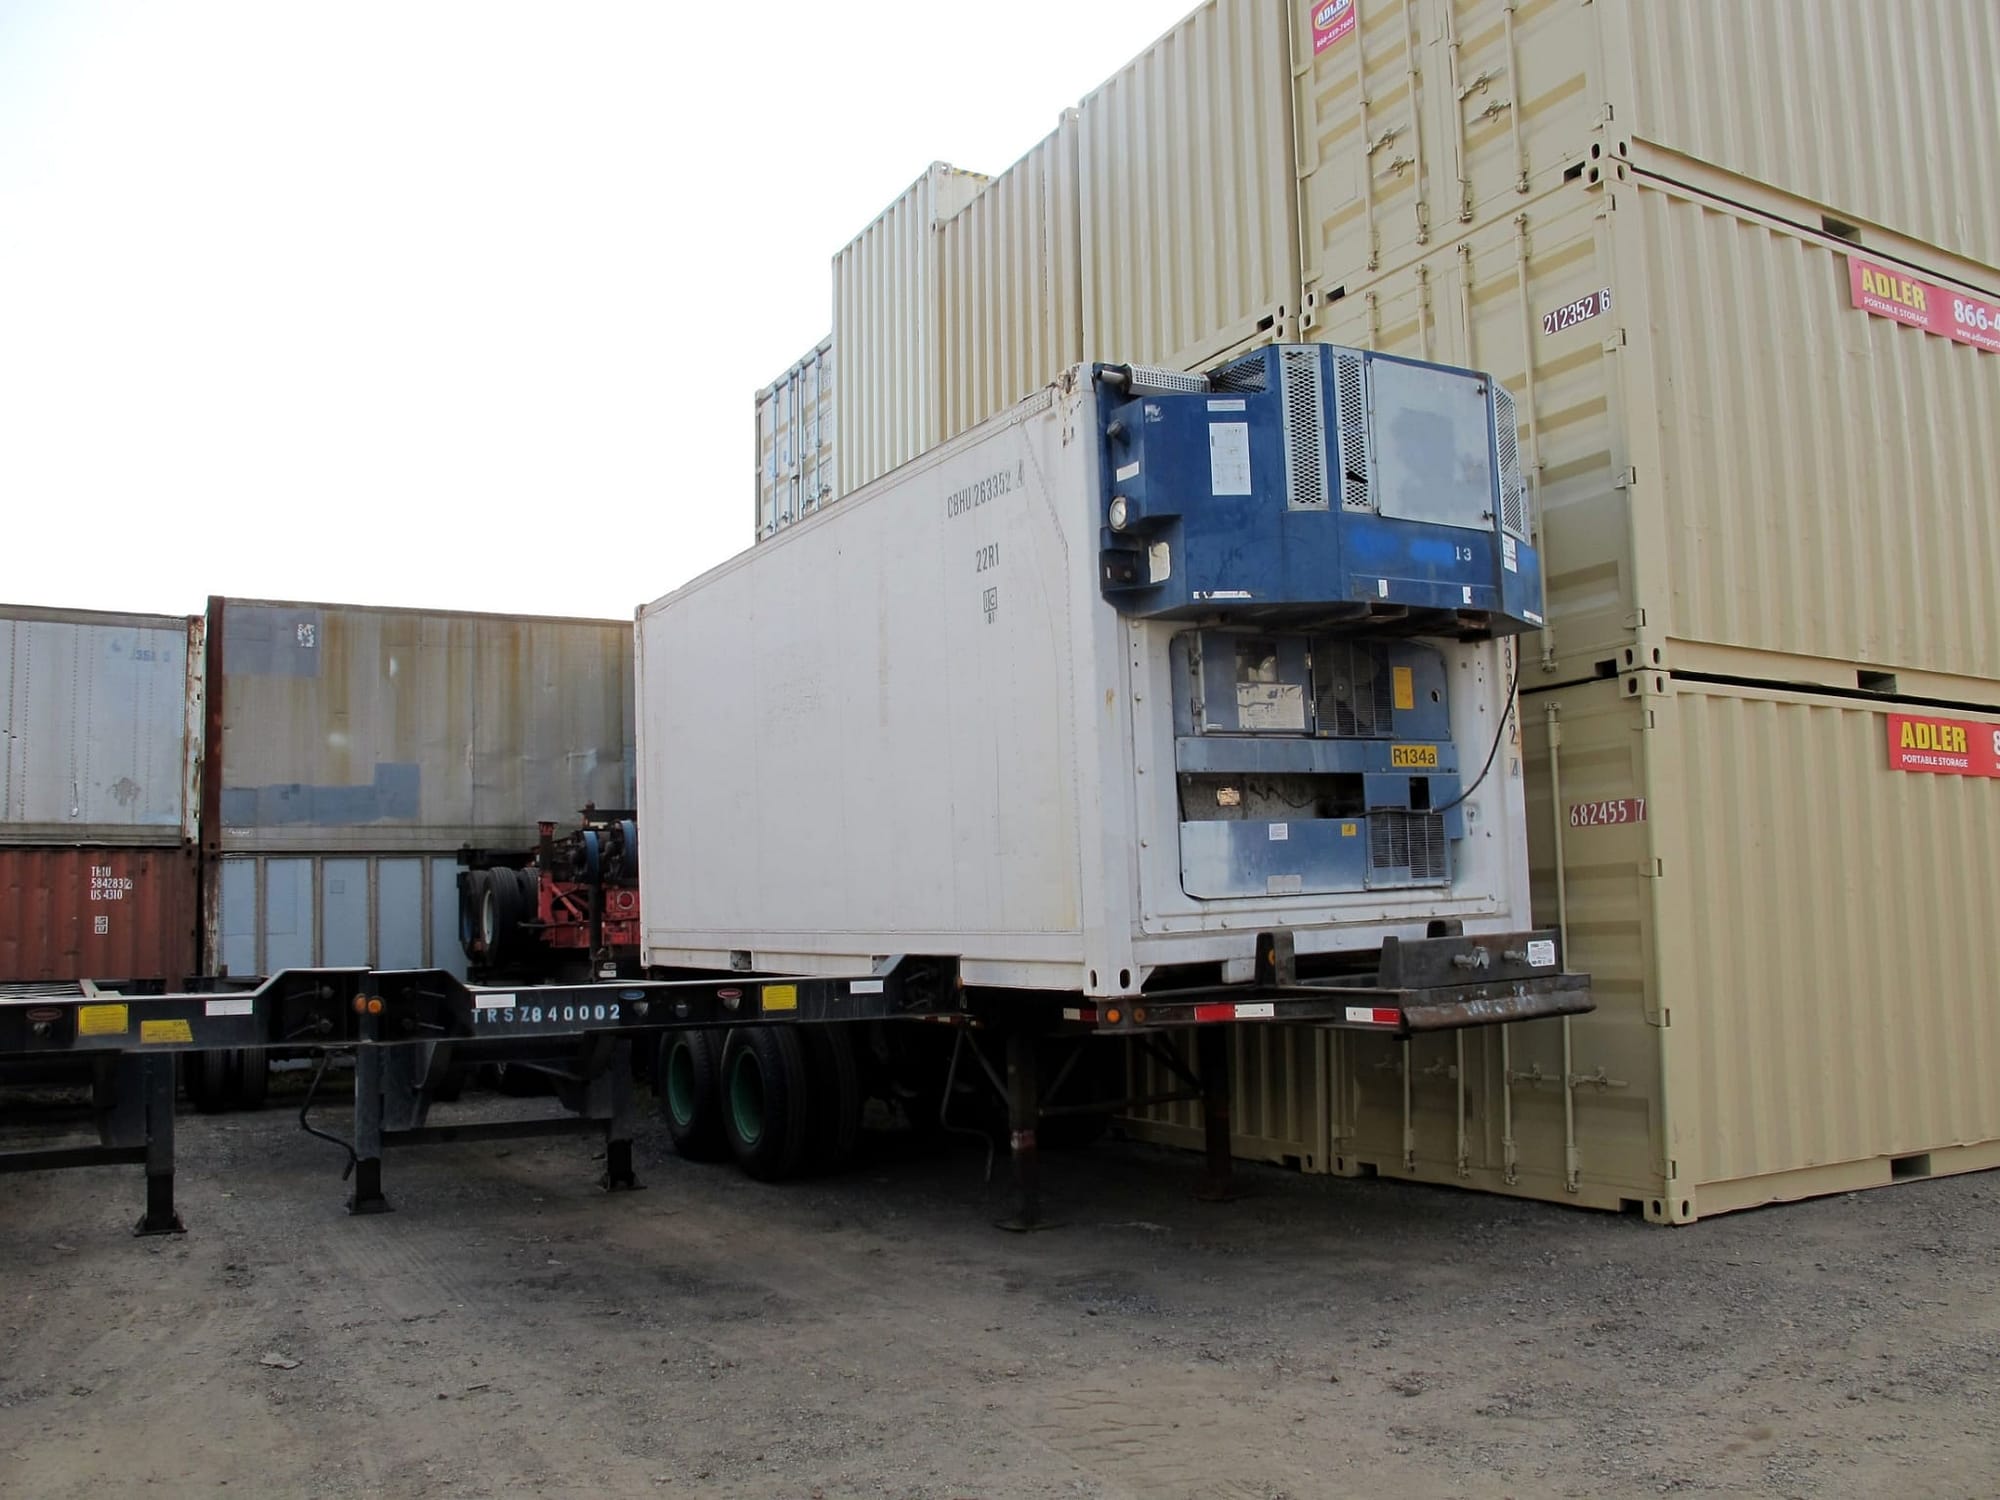 TRS sells and rents reefers and diesel gensets for export and domestic use